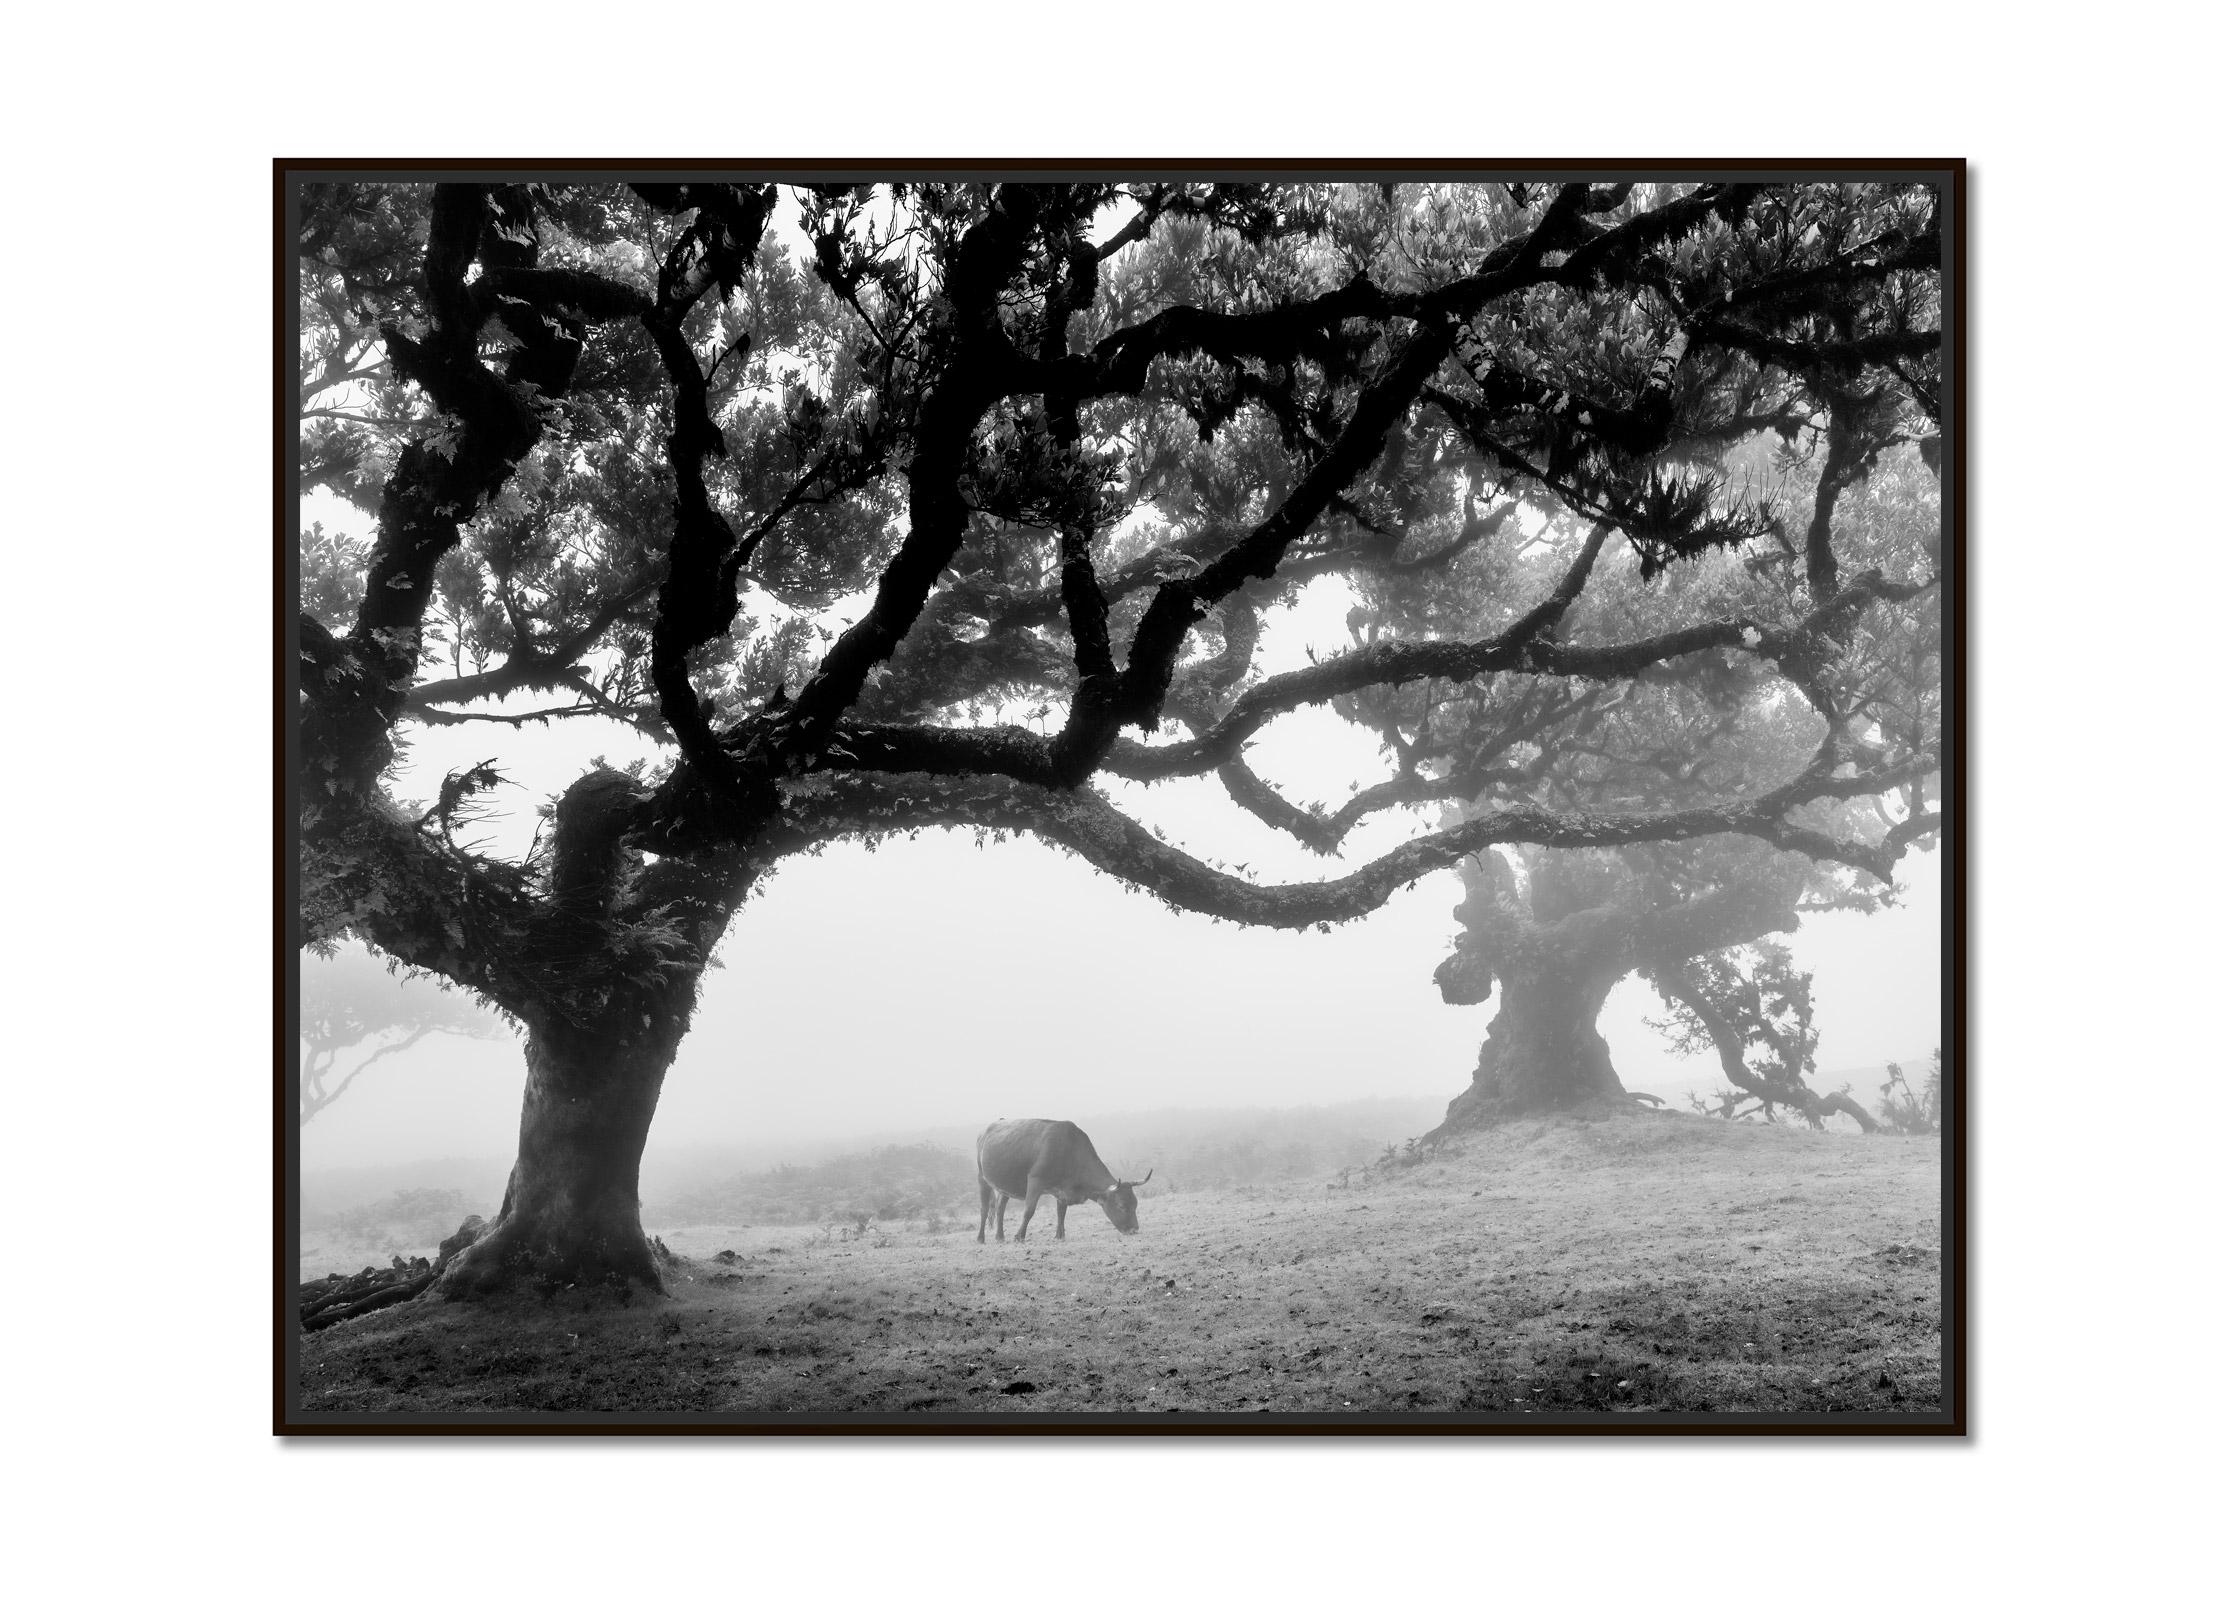 Cows on the foggy pasture Madeira black and white art landscape photography - Photograph by Gerald Berghammer